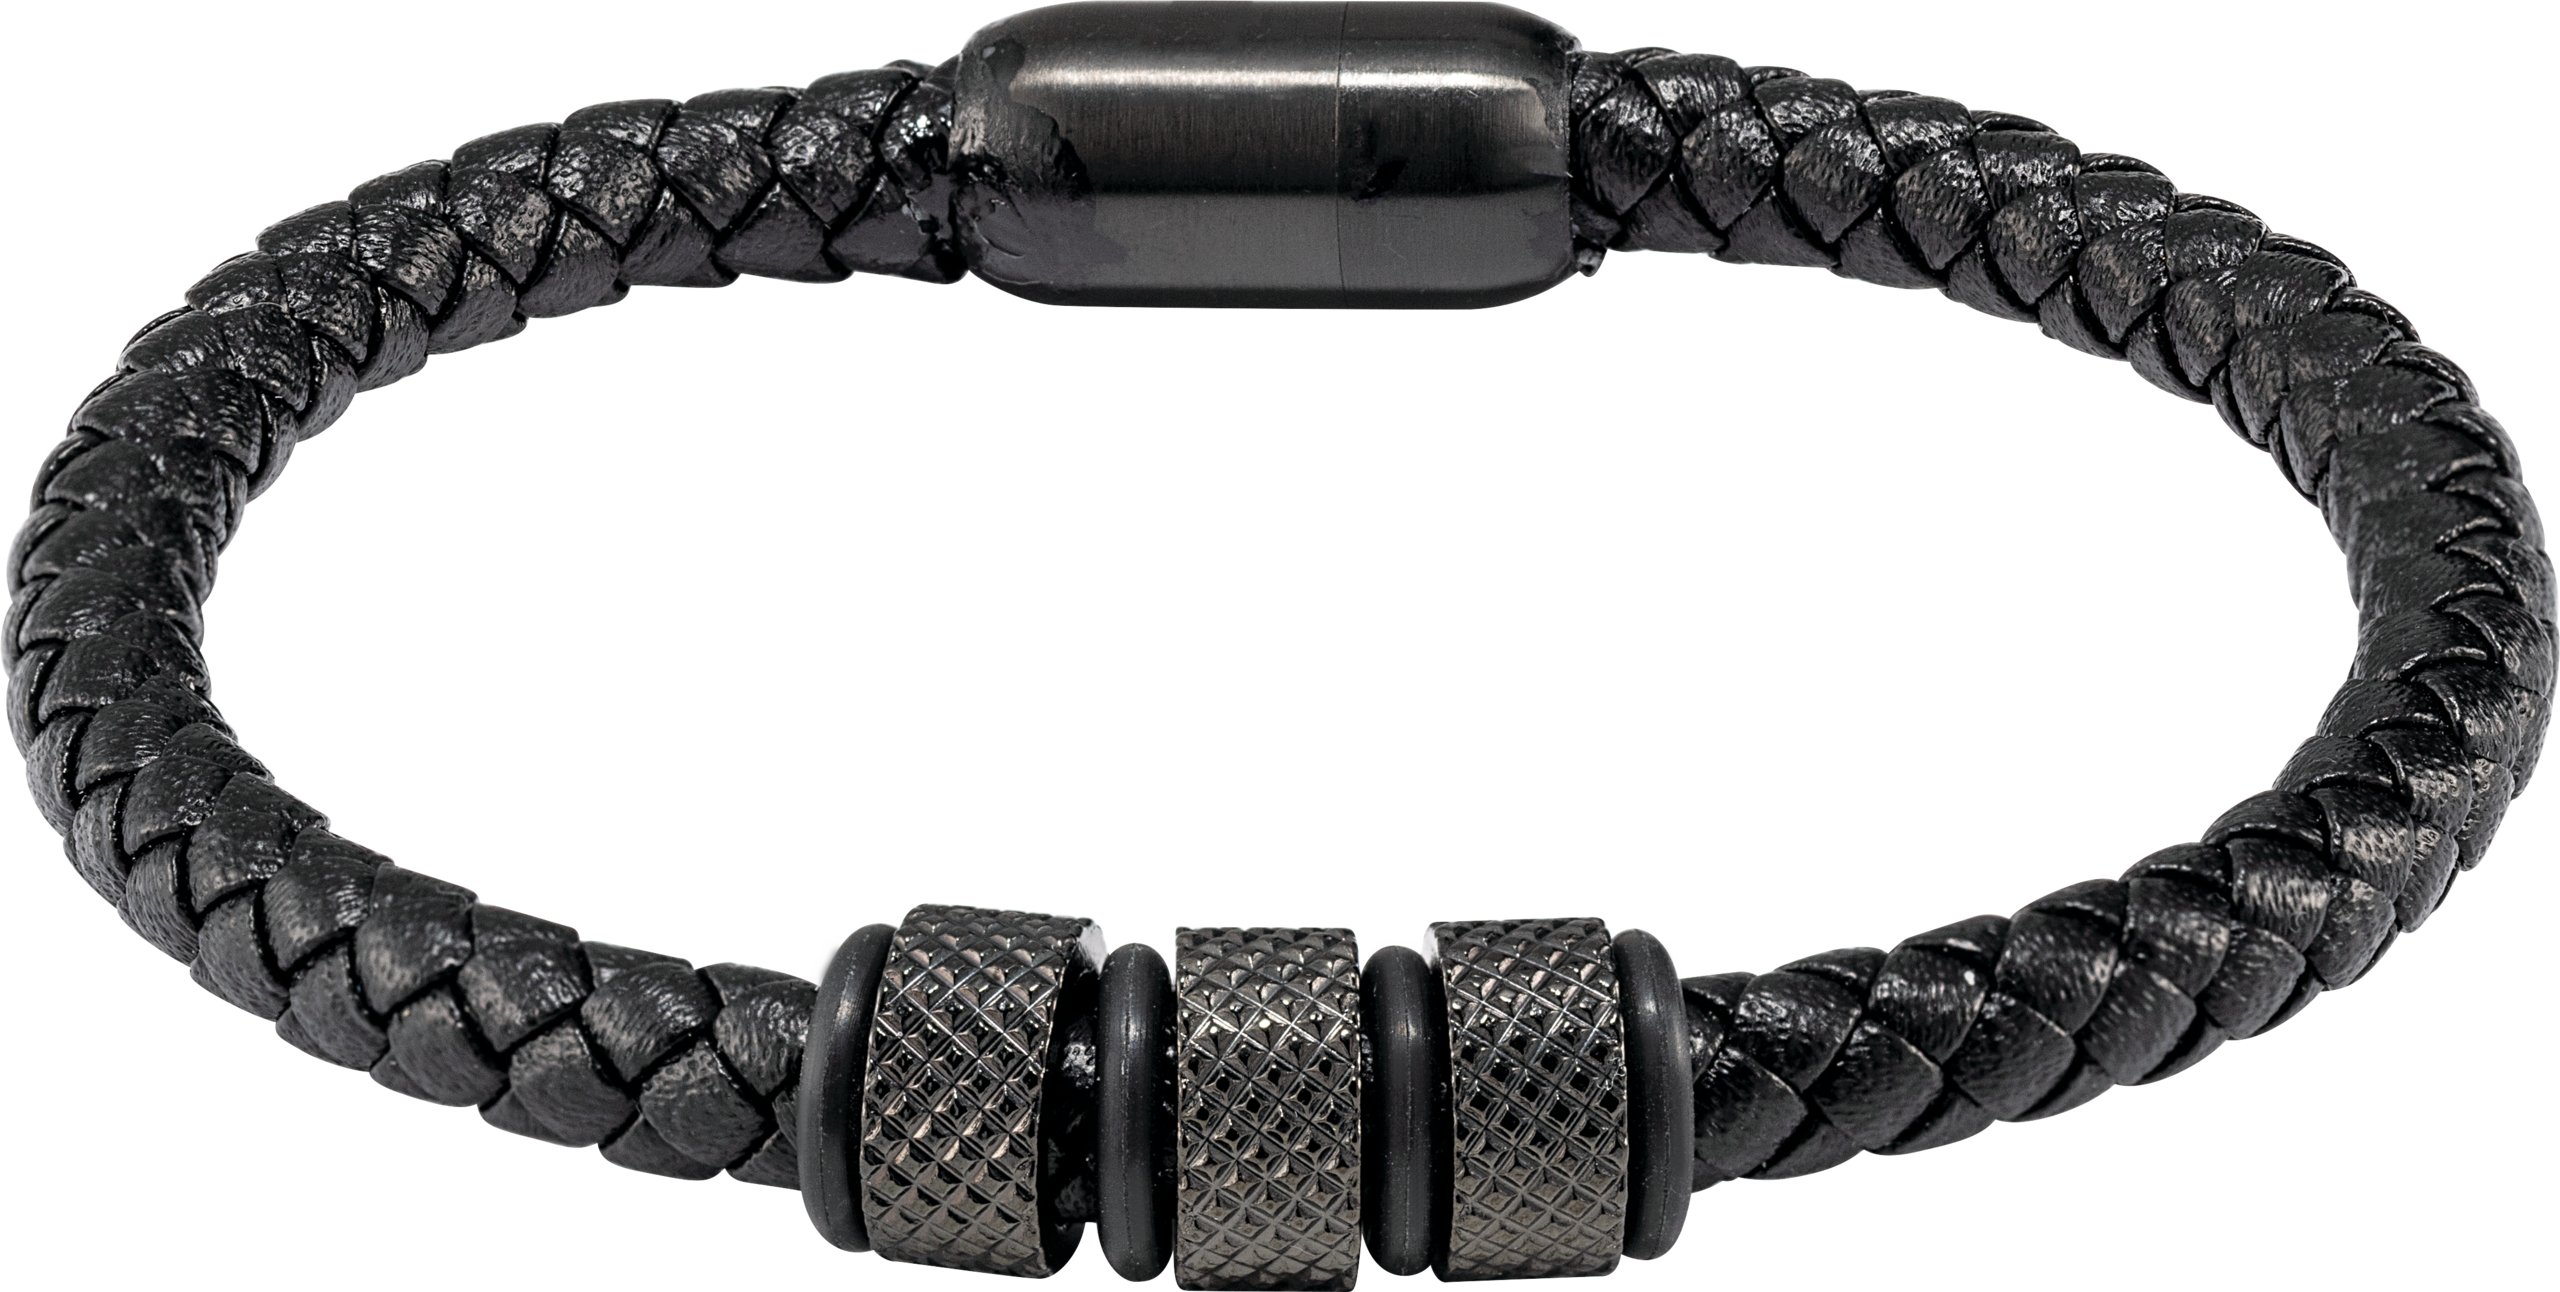 Black PVD Stainless Steel 6 mm Braided Leather 8" Bracelet